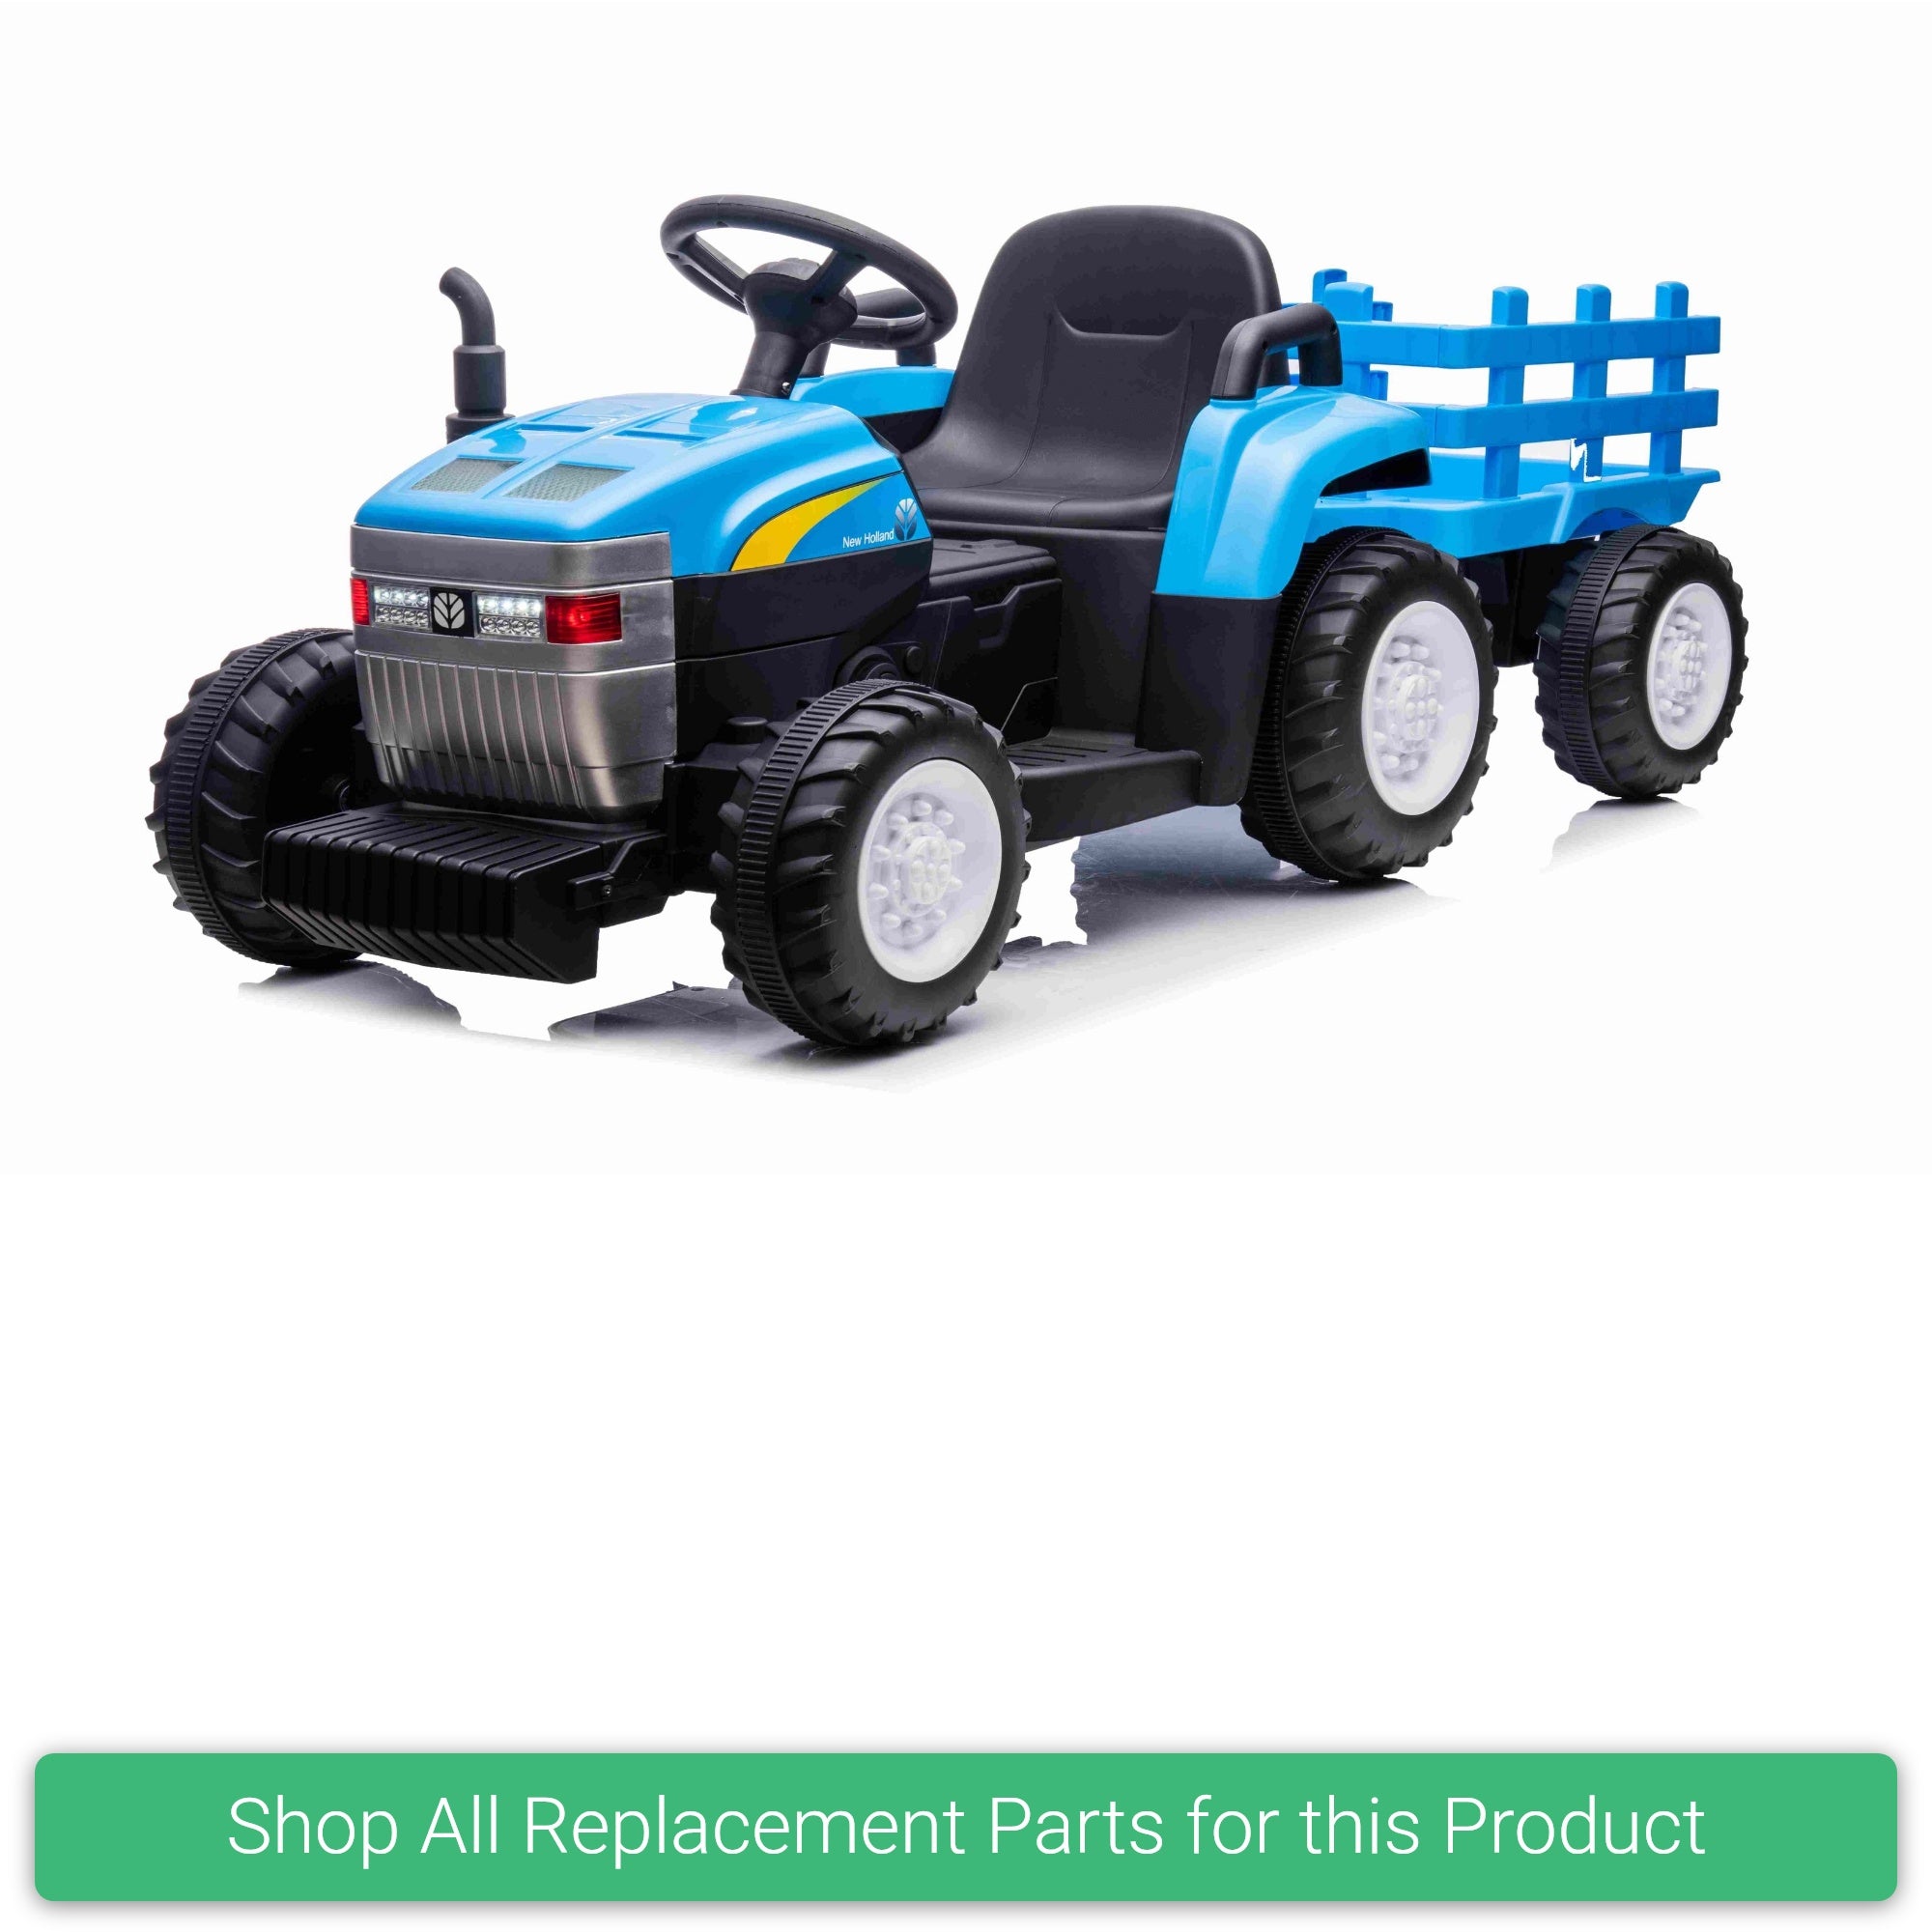 Replacement Parts and Spares for Kids New Holland T7 Tractor With Trailer - HOLLAND-T7-BLU - A009B With Trailer